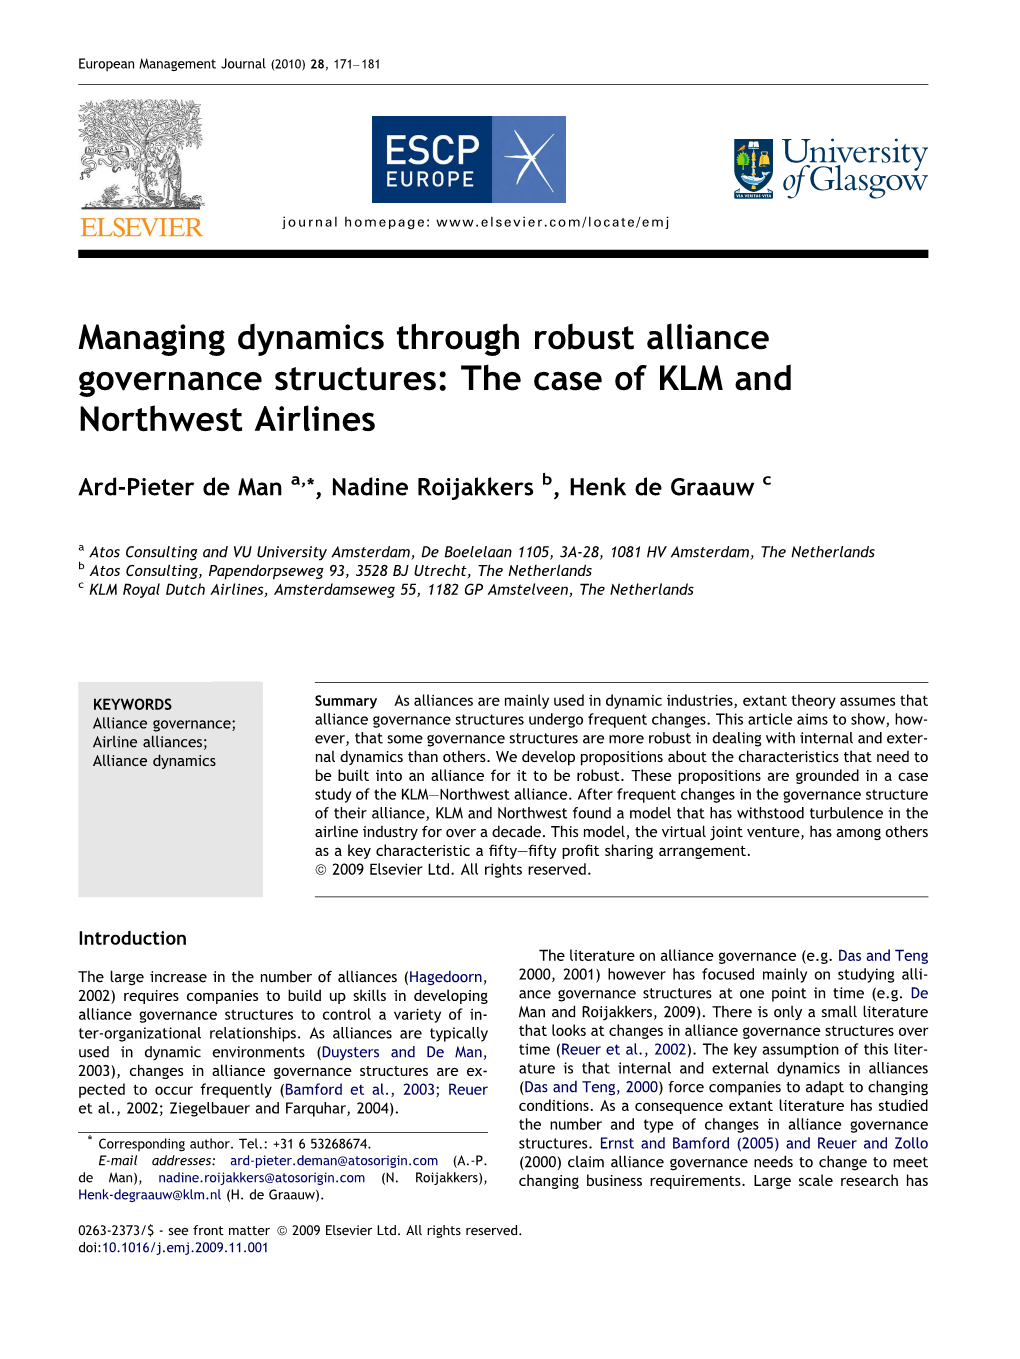 Managing Dynamics Through Robust Alliance Governance Structures: the Case of KLM and Northwest Airlines